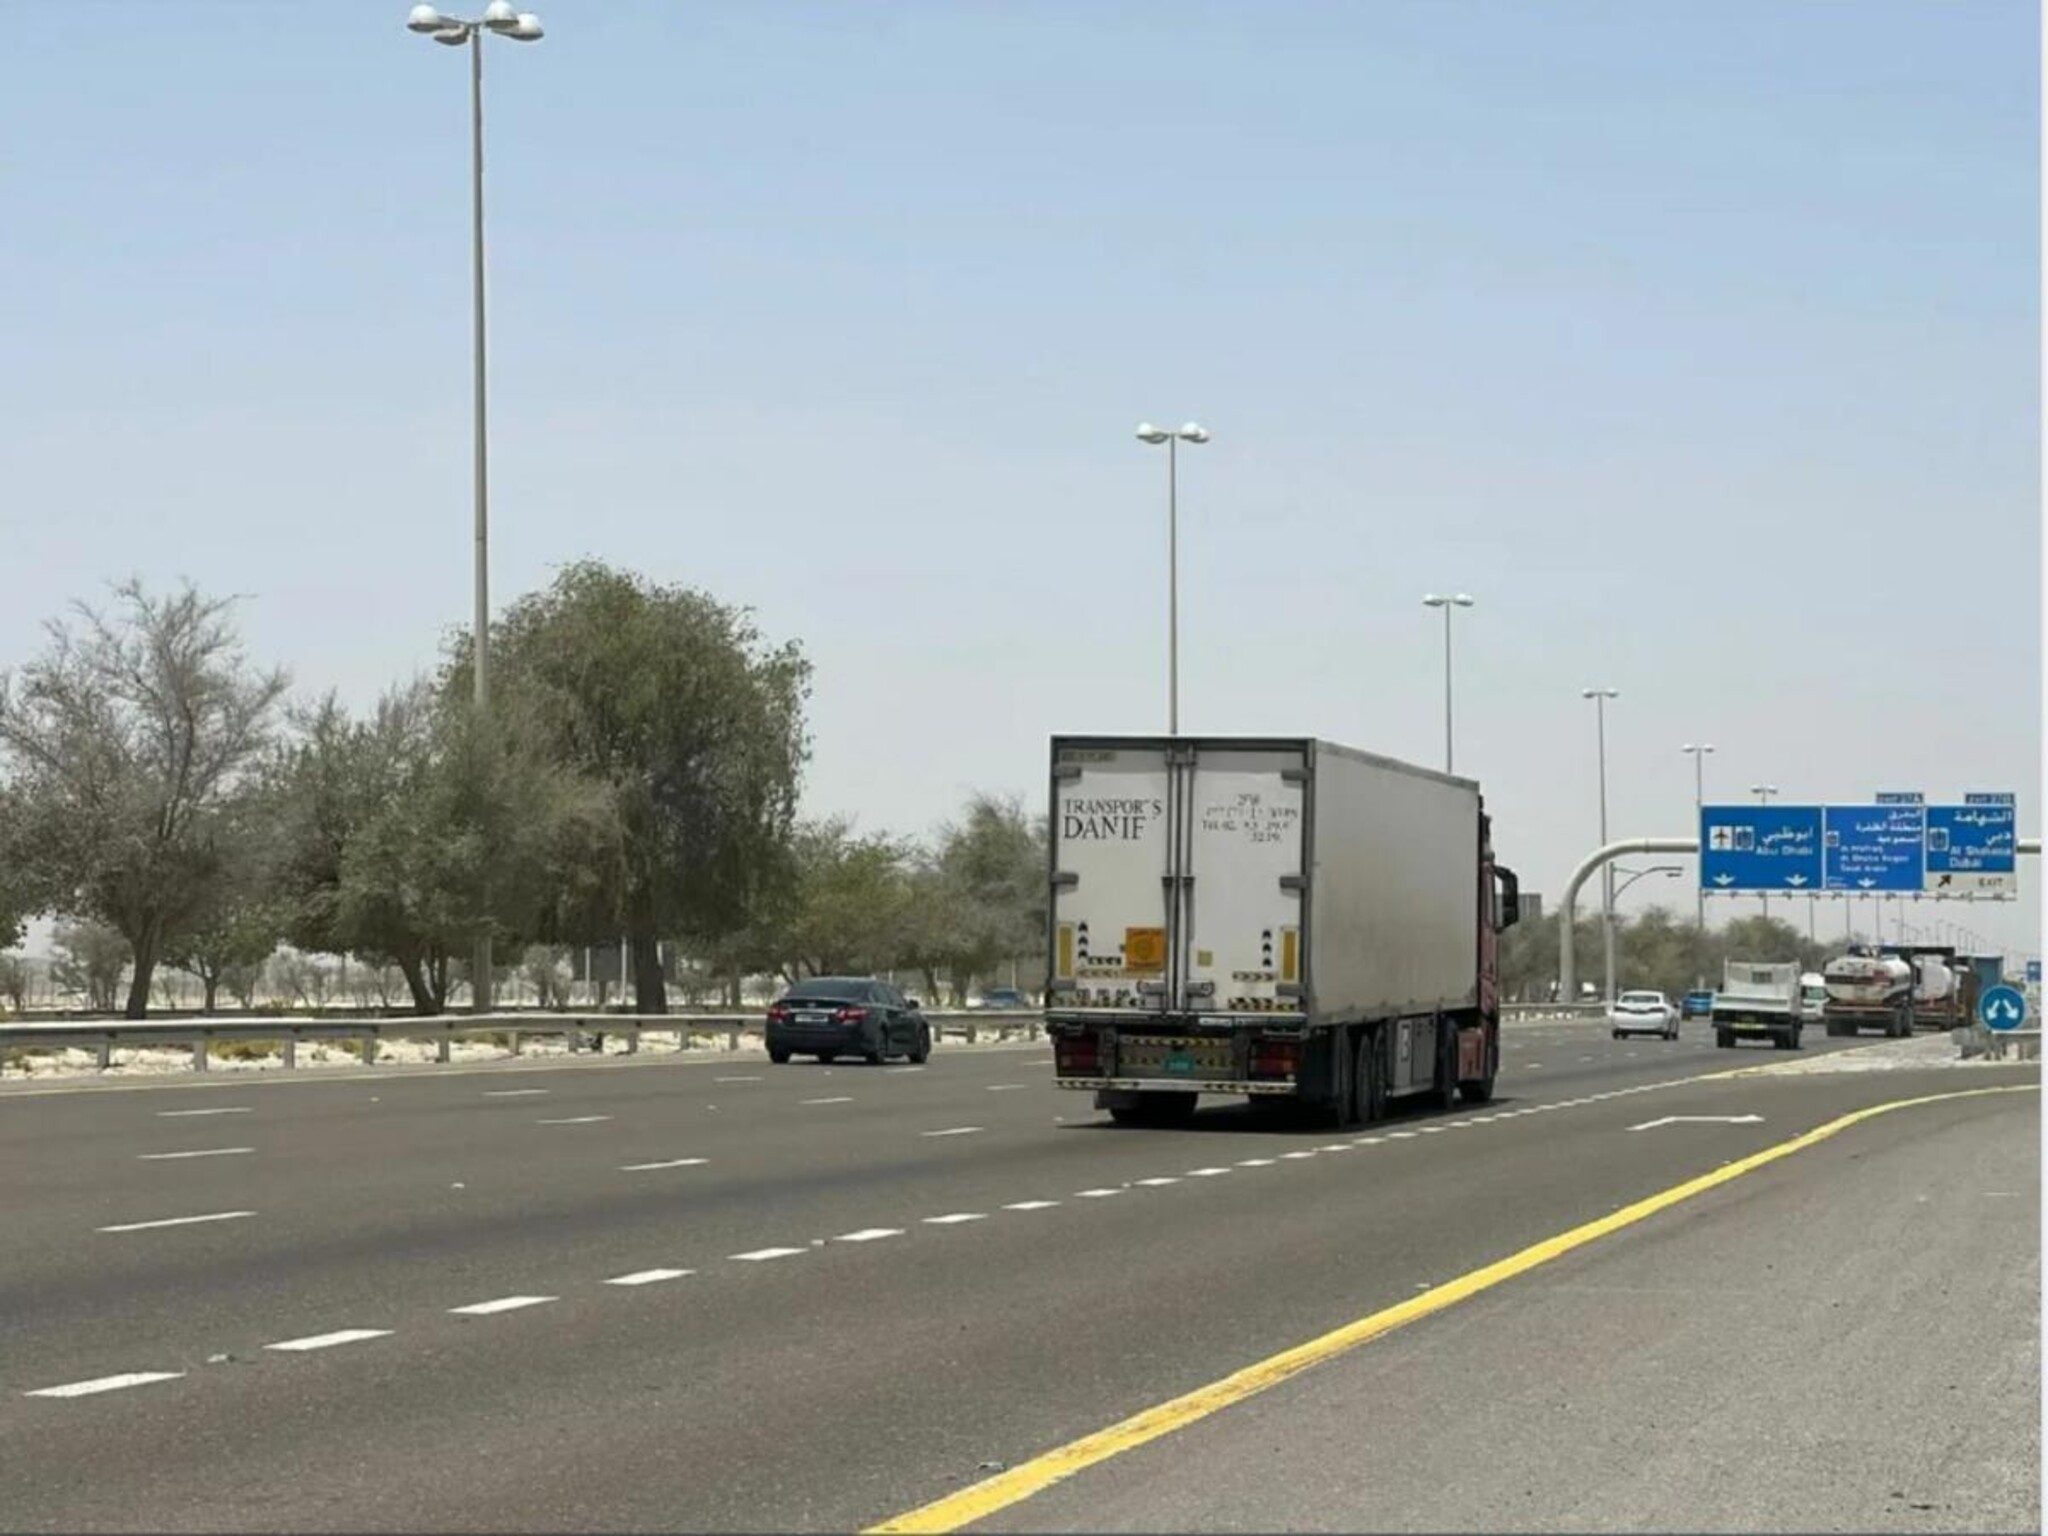 The Roads and Transport Authority announced a reduction in speed limits on major roads in Sharjah